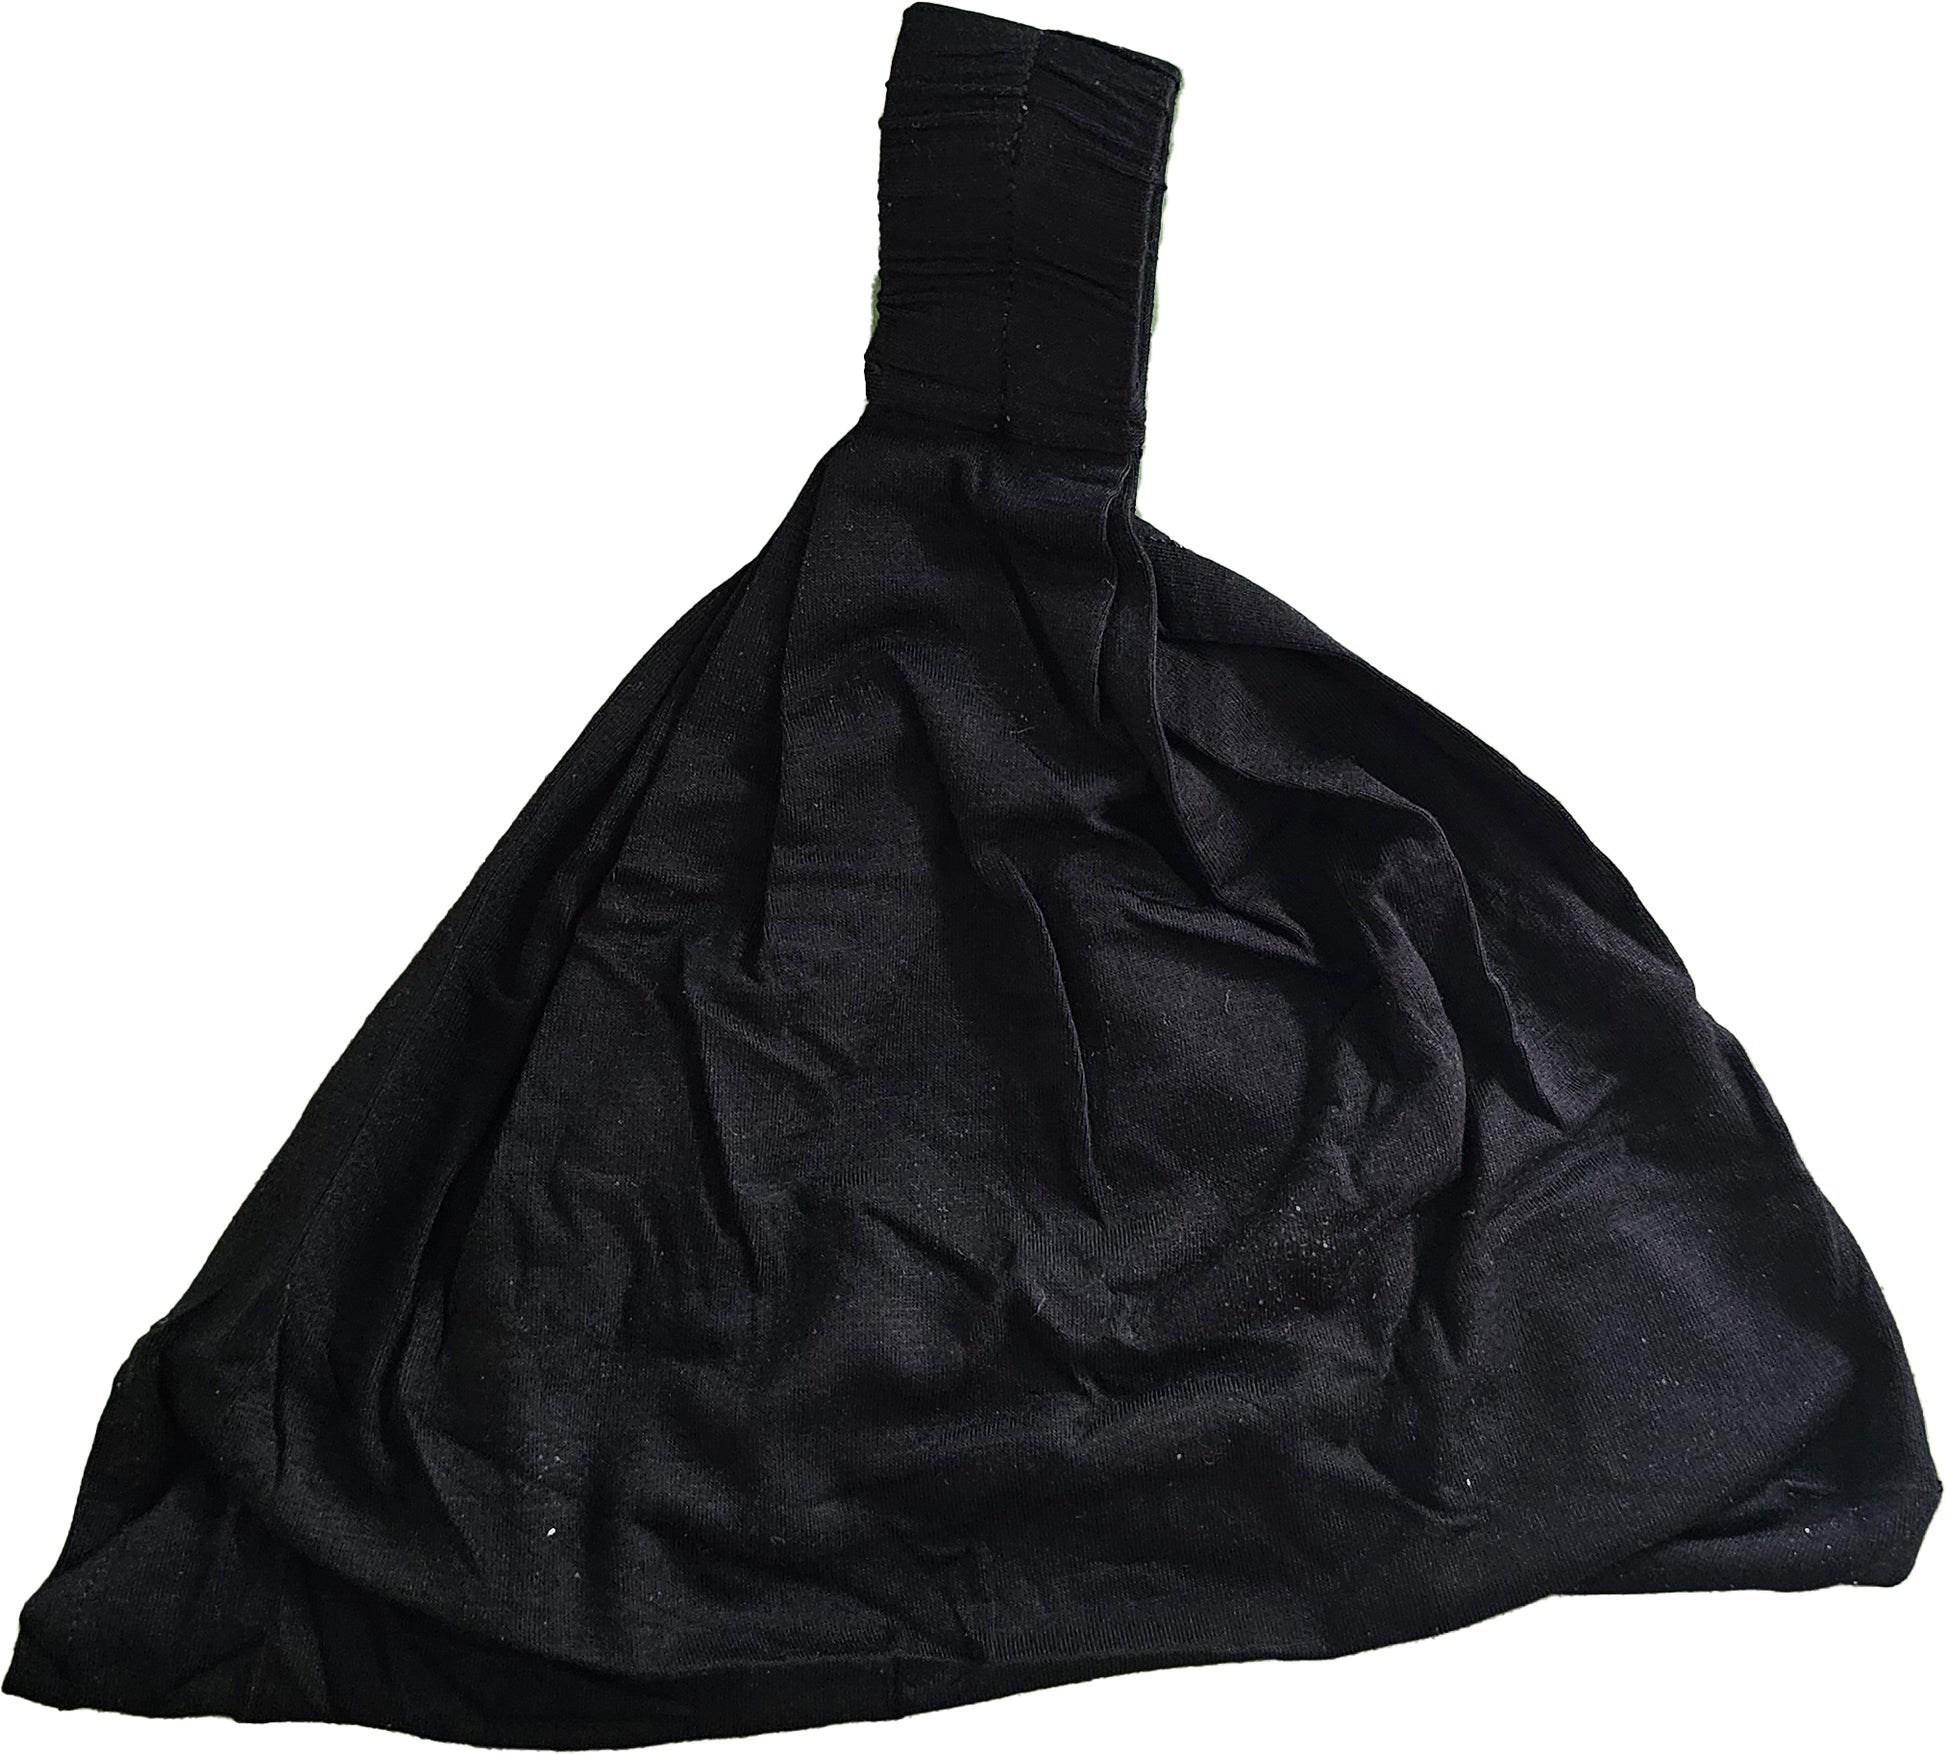 the back of a black dress on a white background